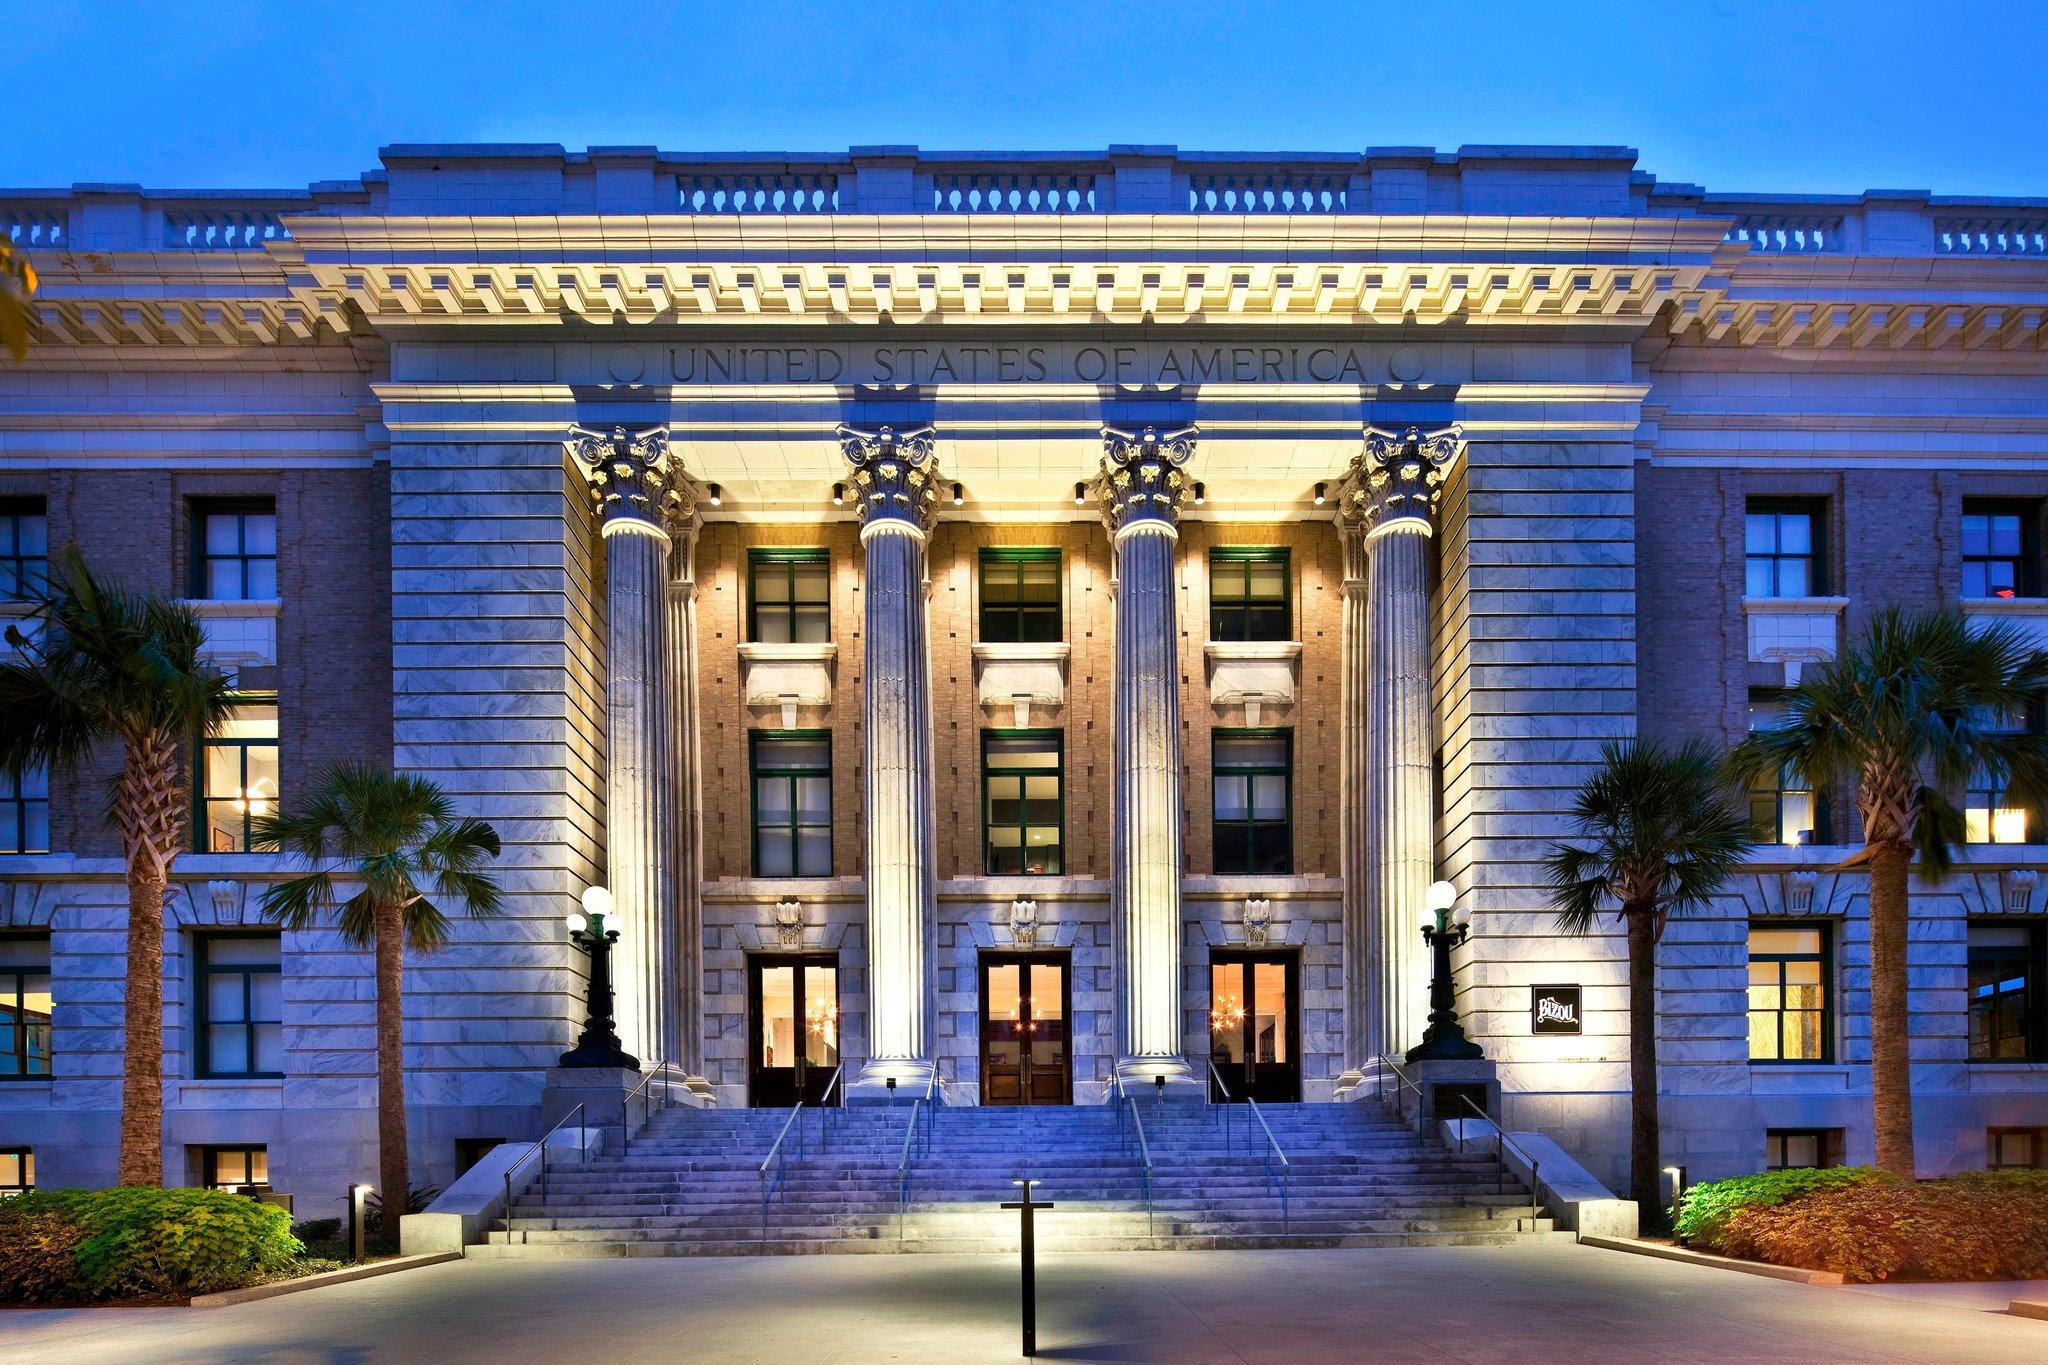 Le Méridien Tampa, The Courthouse in Tampa, FL